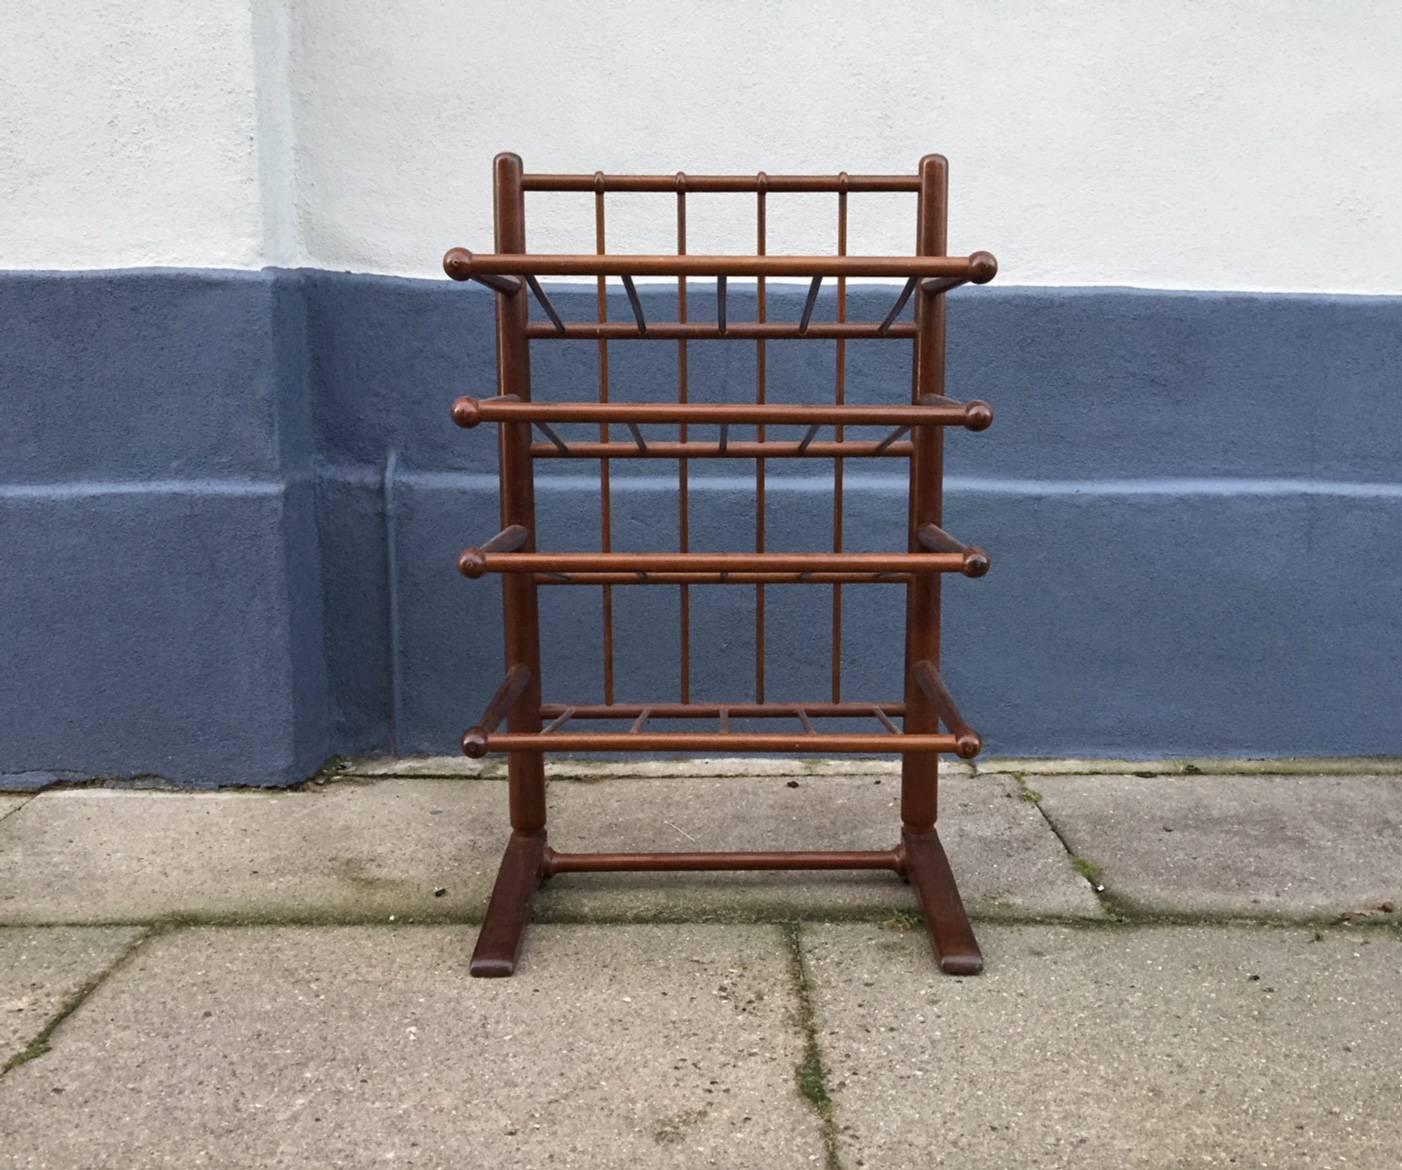 Magazine or shoe rack designed by Frits Henningsen and manufactured by Andreas Tuck in Denmnark during the 1940s. The solid mahogany frame features Drumstick detaling and bend/shaped wood detailing.